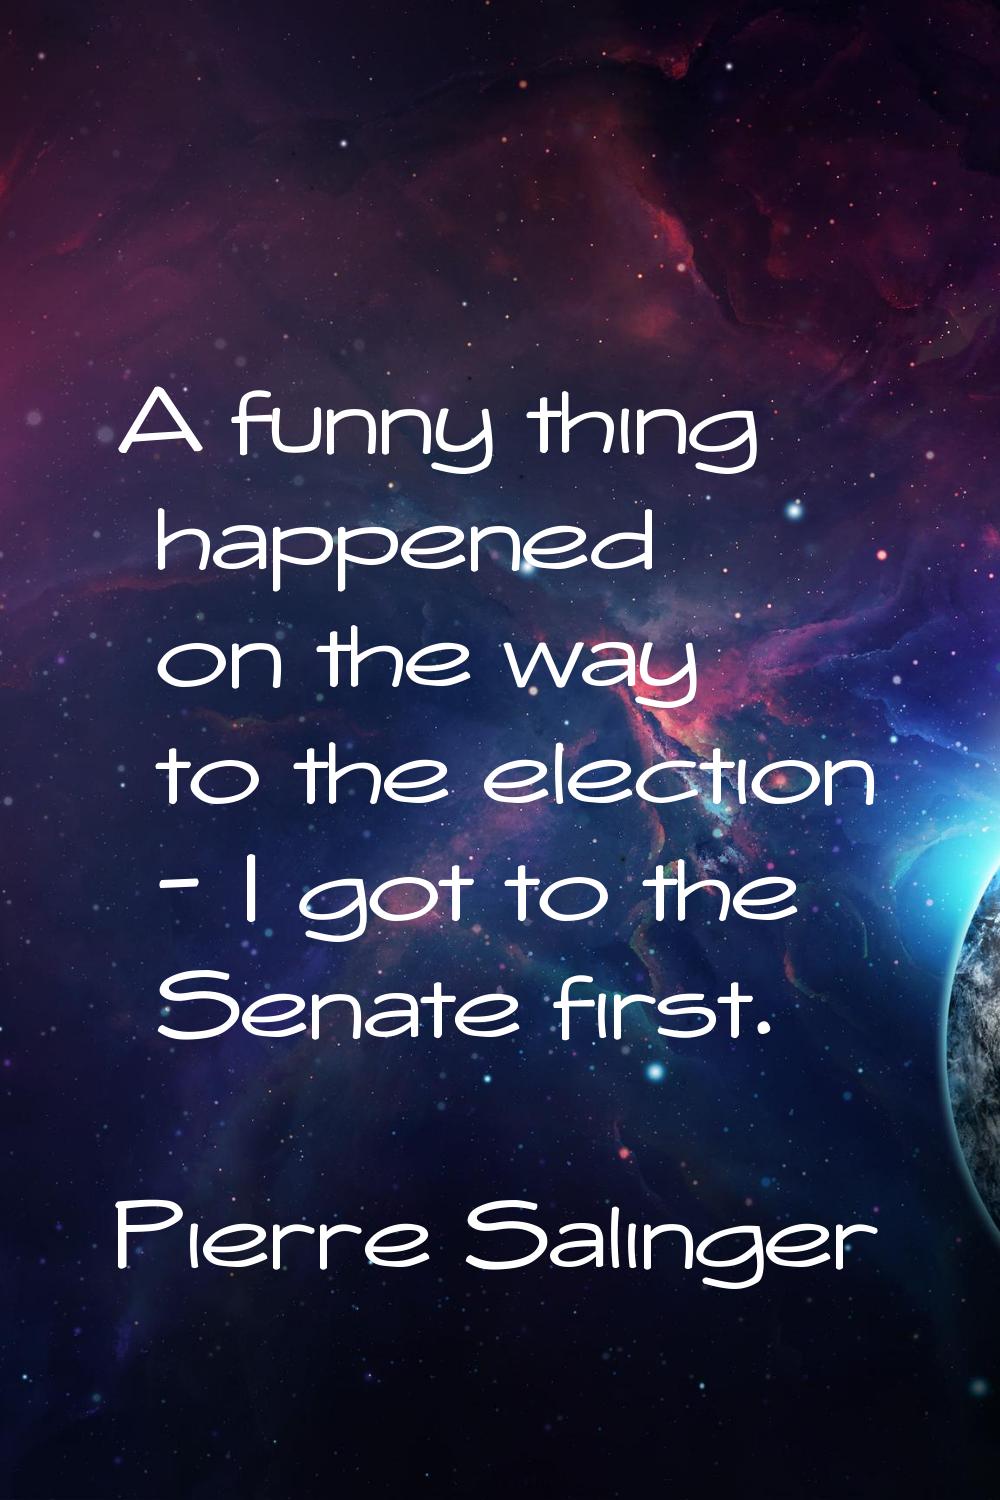 A funny thing happened on the way to the election - I got to the Senate first.